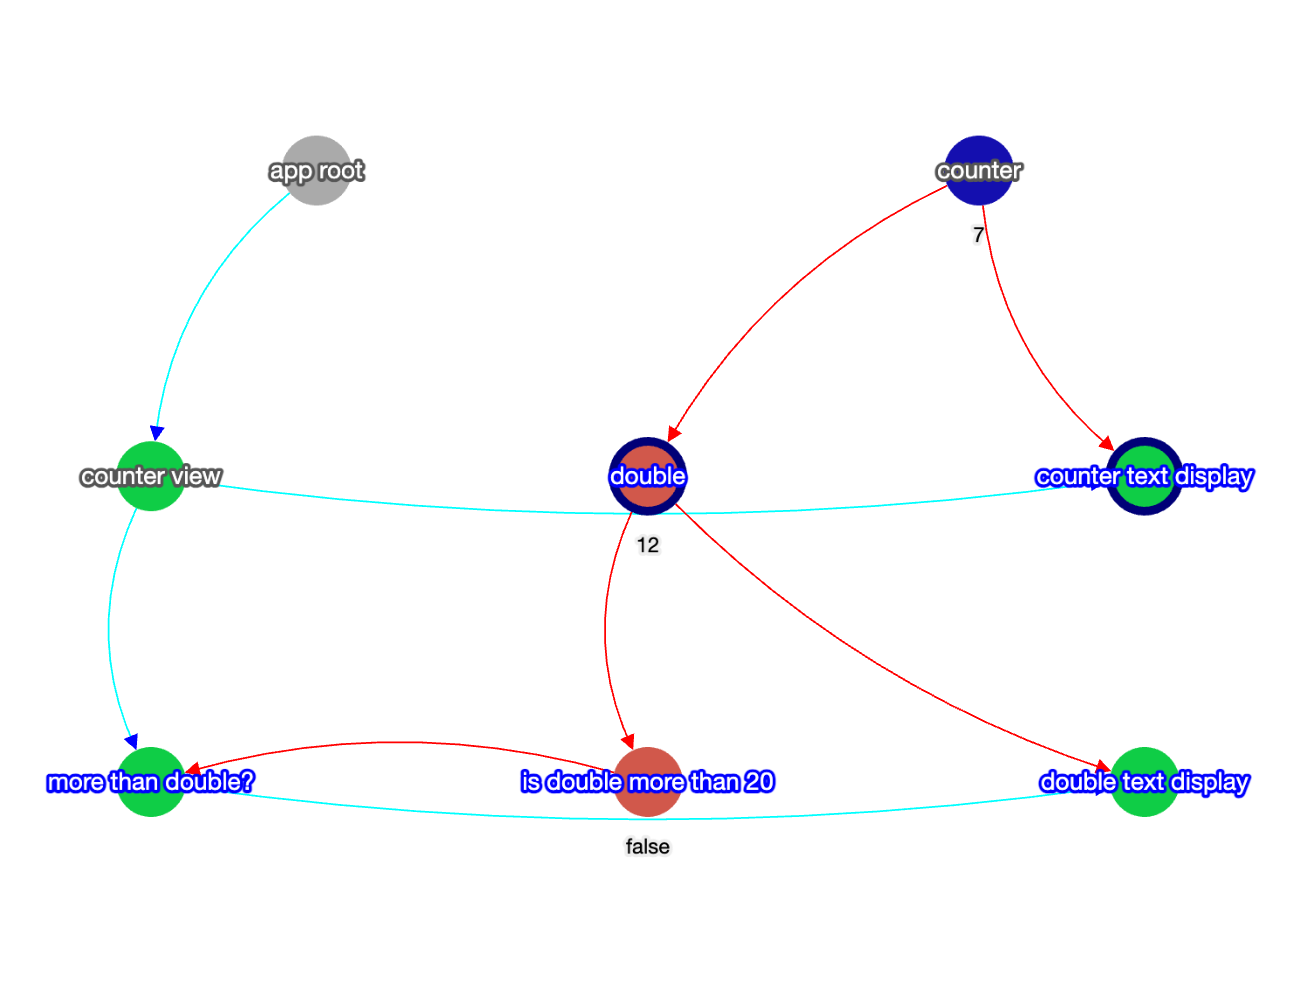 dependency graph viewer depiction